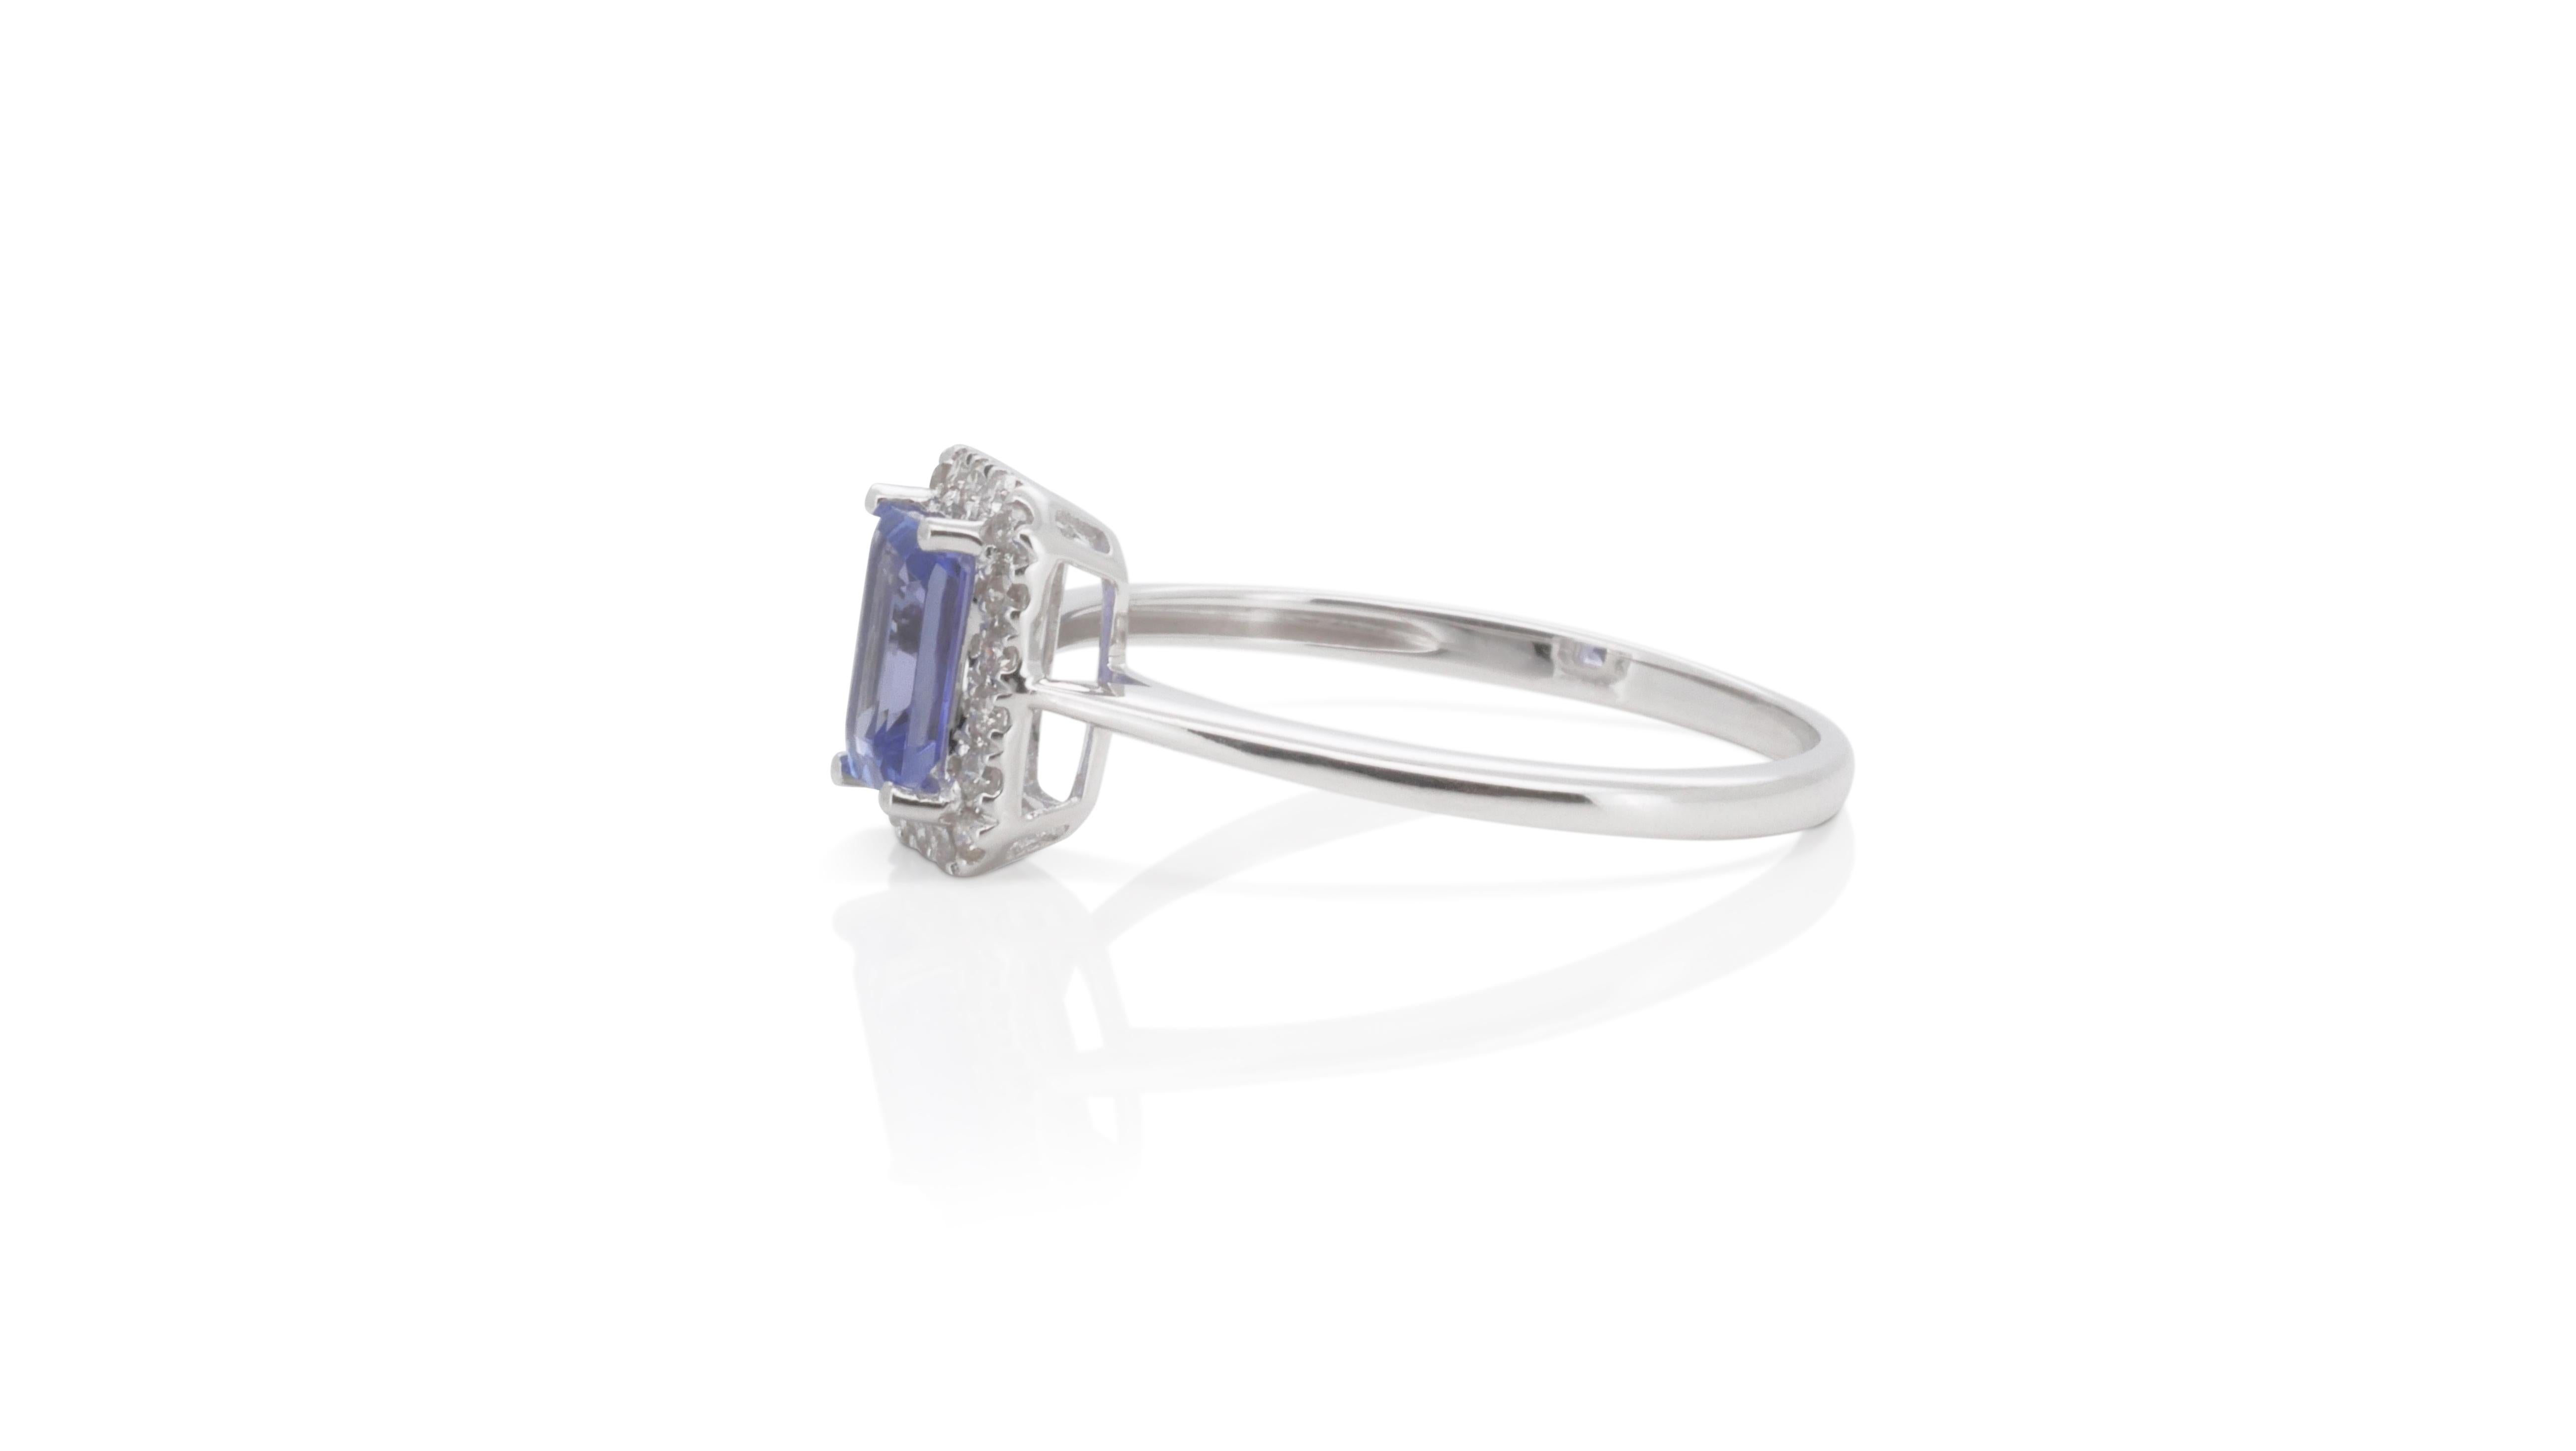 Stunning 18k White Gold Halo Ring 0.71 Ct Natural Tanzanite & Diamonds NGI Cert In Excellent Condition For Sale In רמת גן, IL